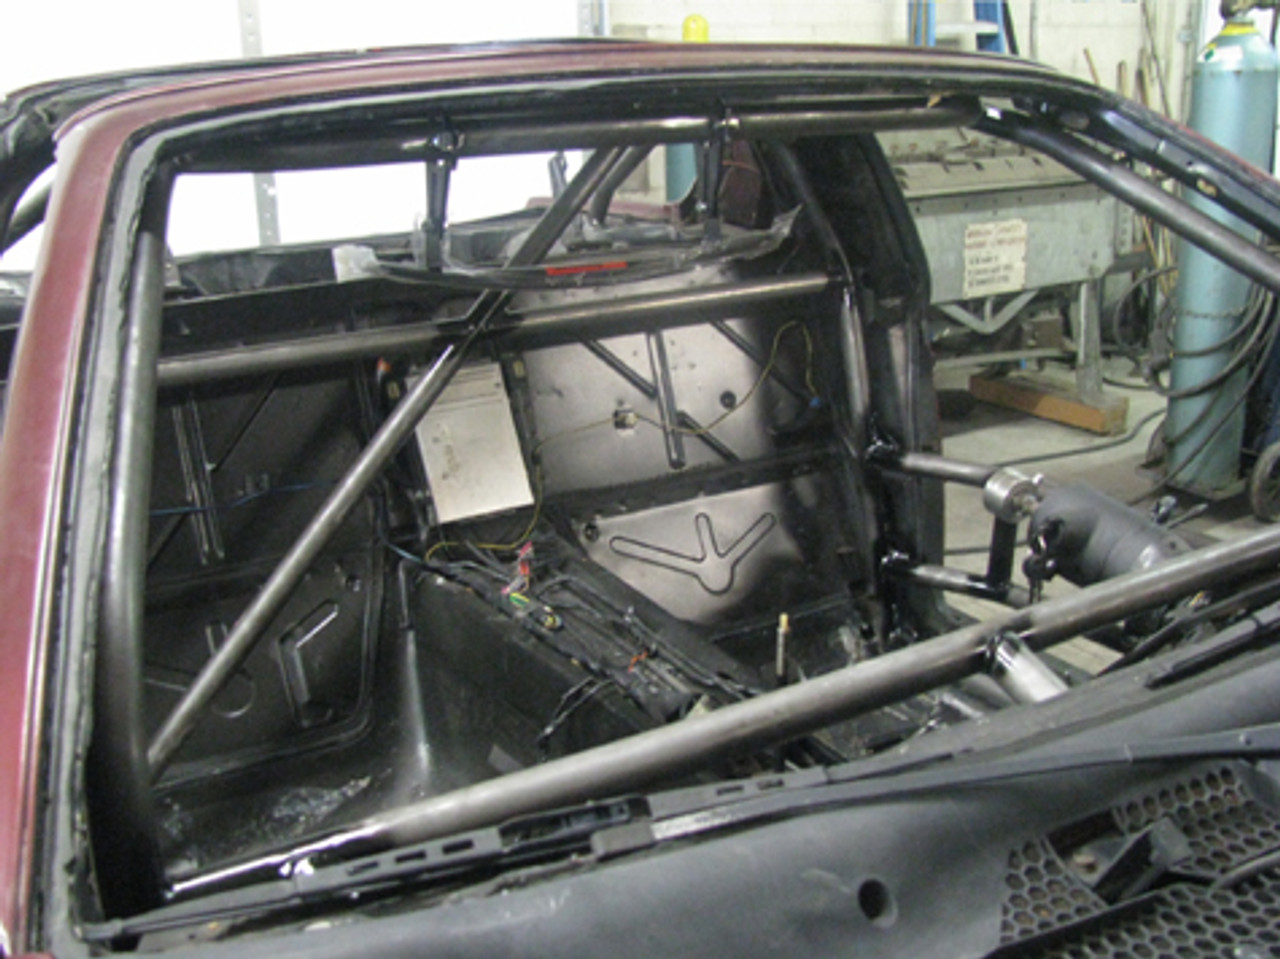 Photos are for Examples we offer, Roll Cage Designs vary in style and options for certain Vehicles